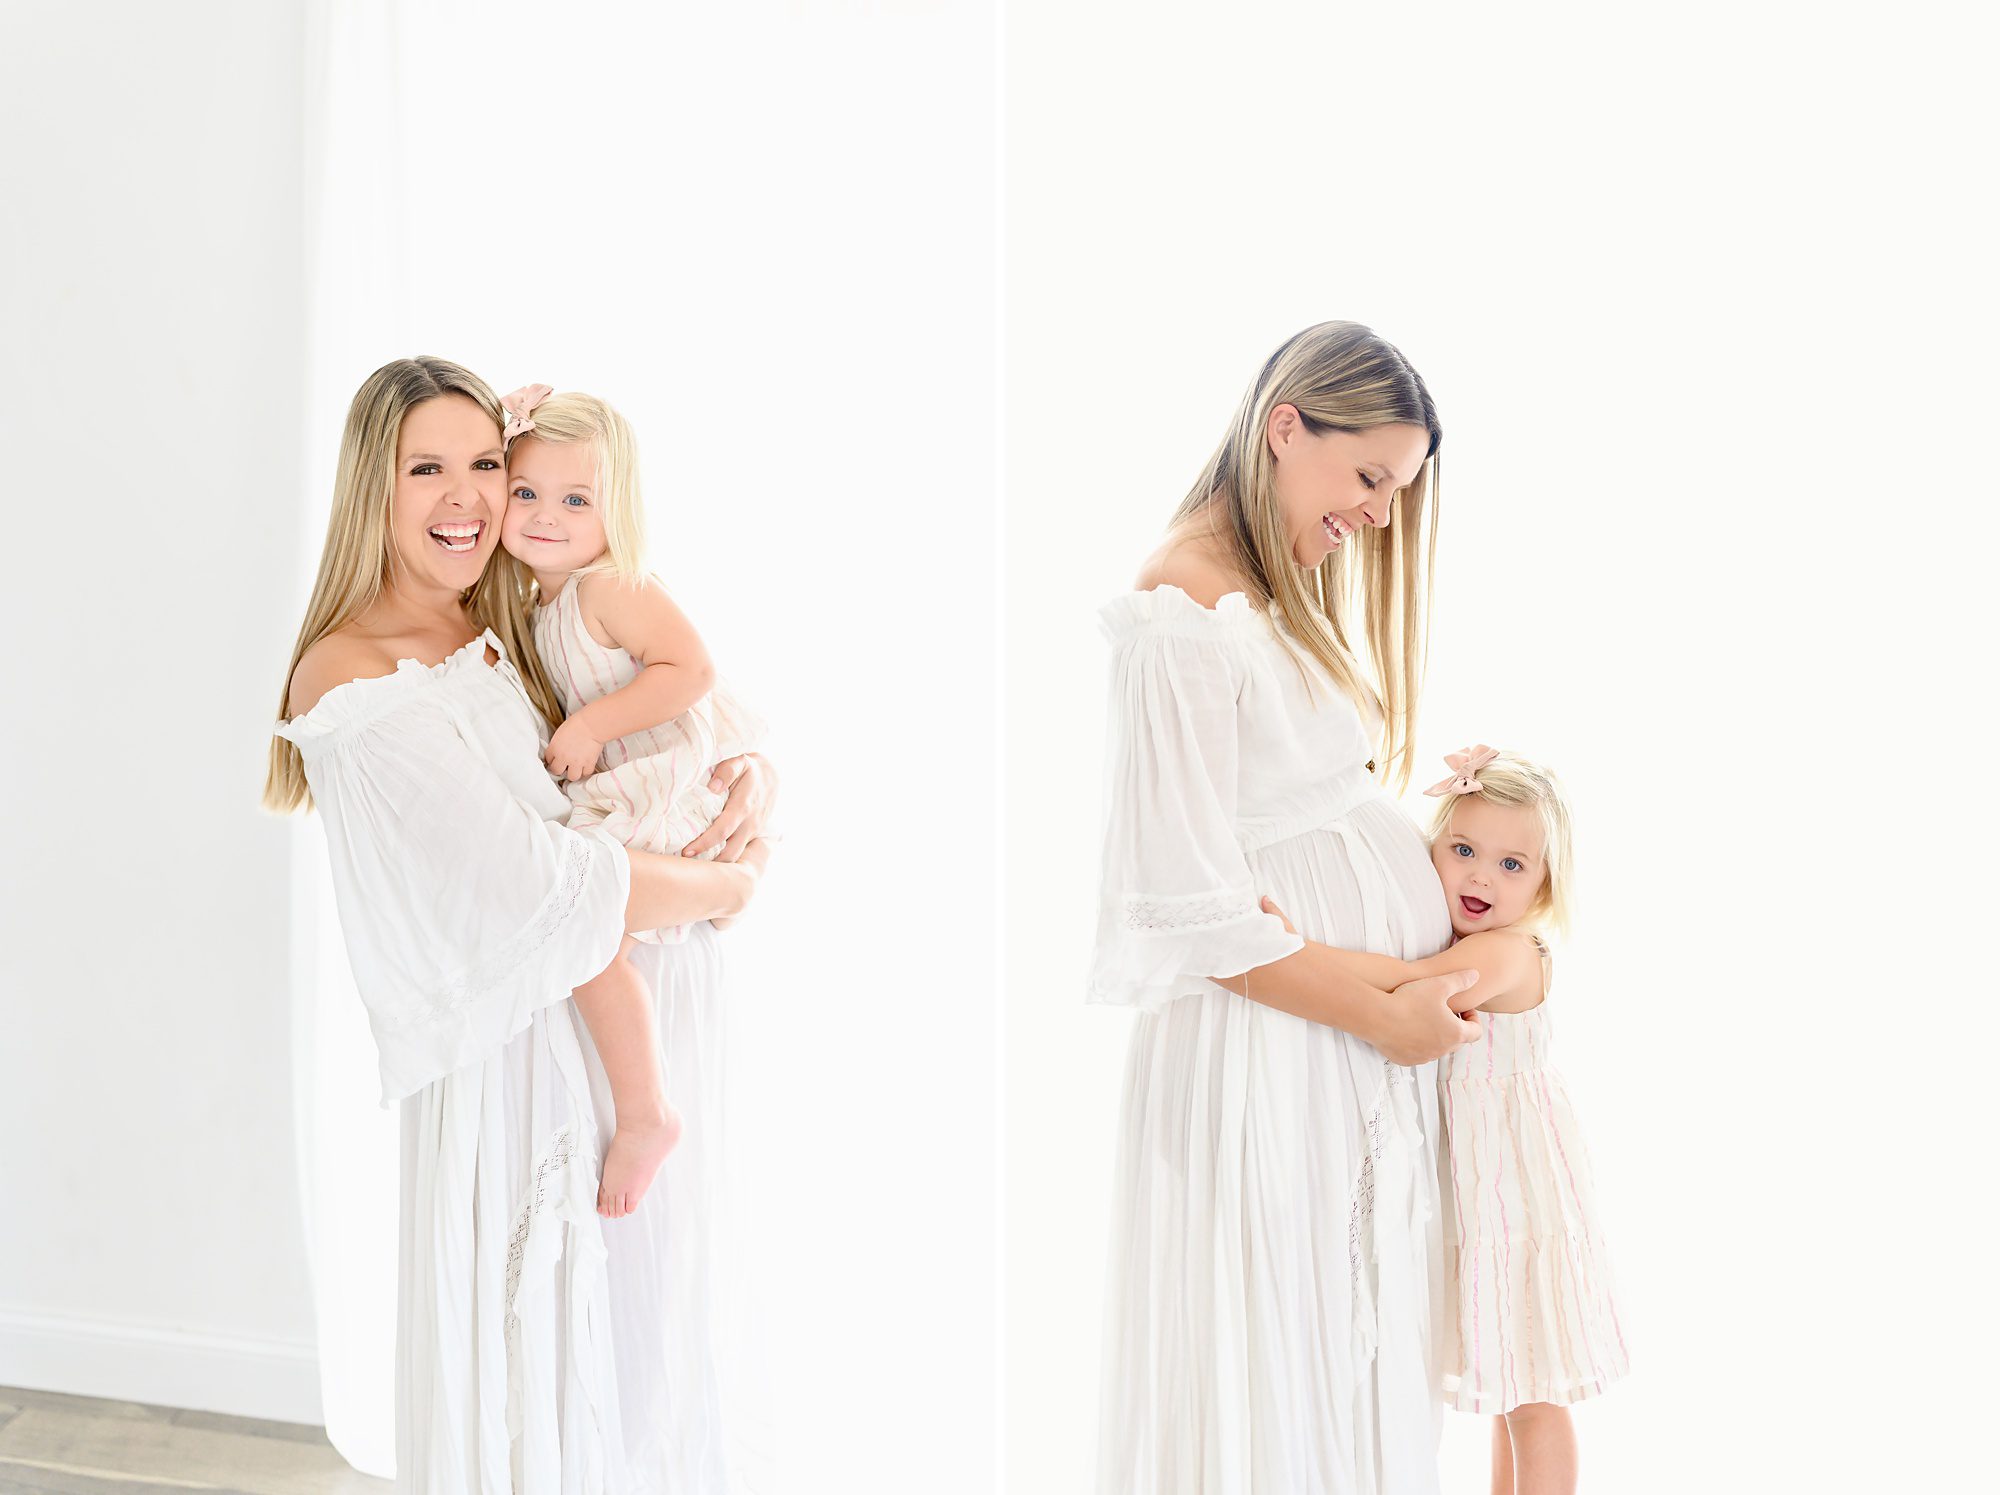 A young mom and her beautiful blond toddler do mommy and me maternity portraits in a bright white studio.